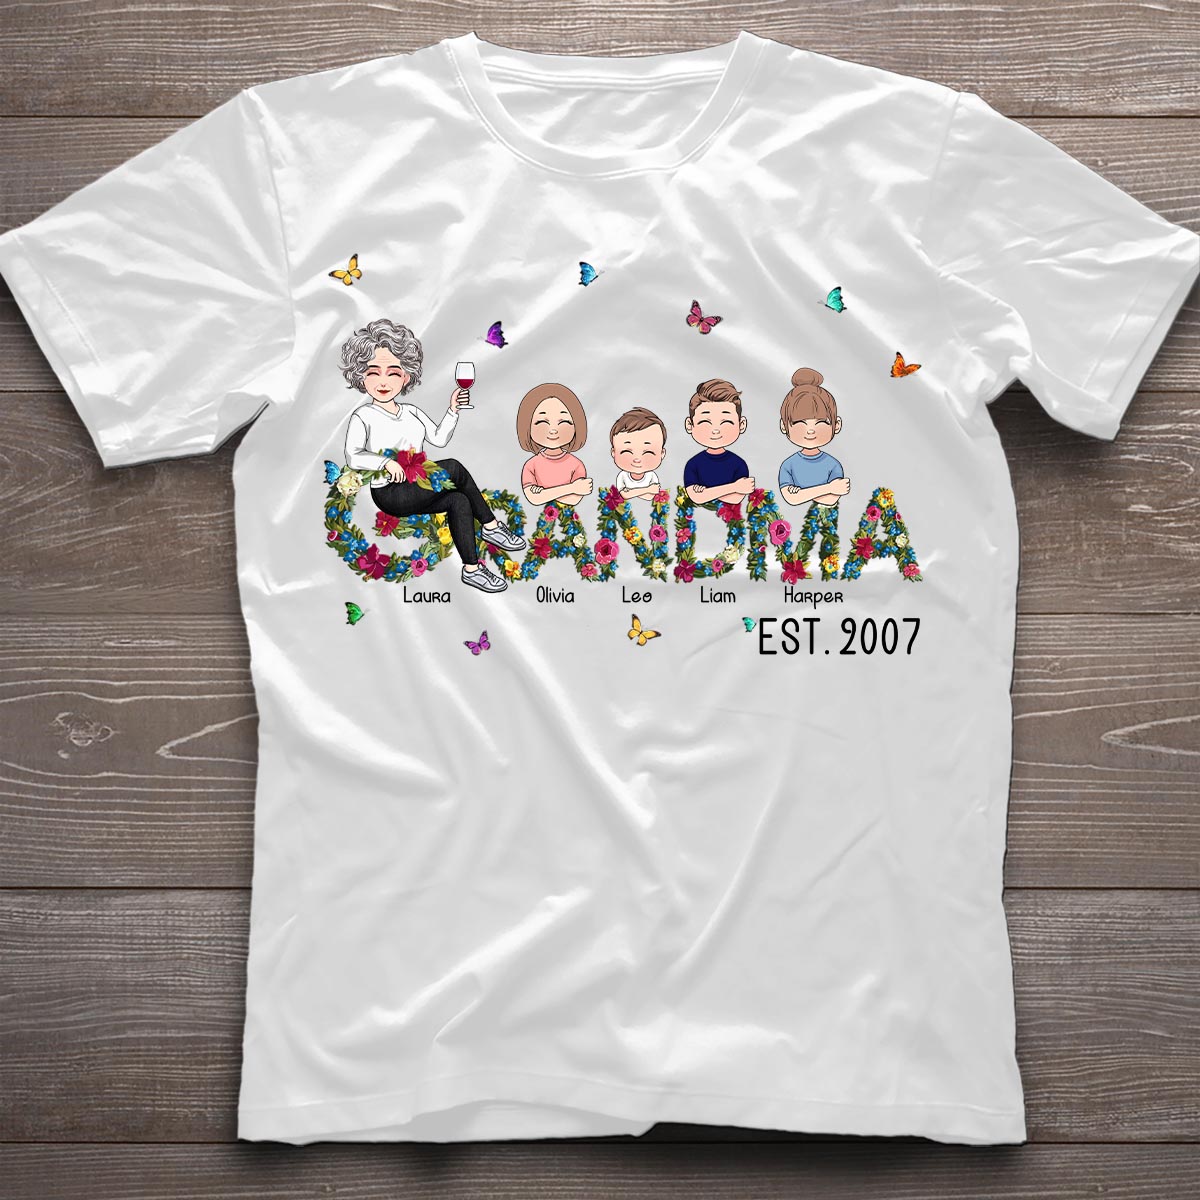 Grandma Since - Personalized Mother's Day Grandma T-shirt and Hoodie